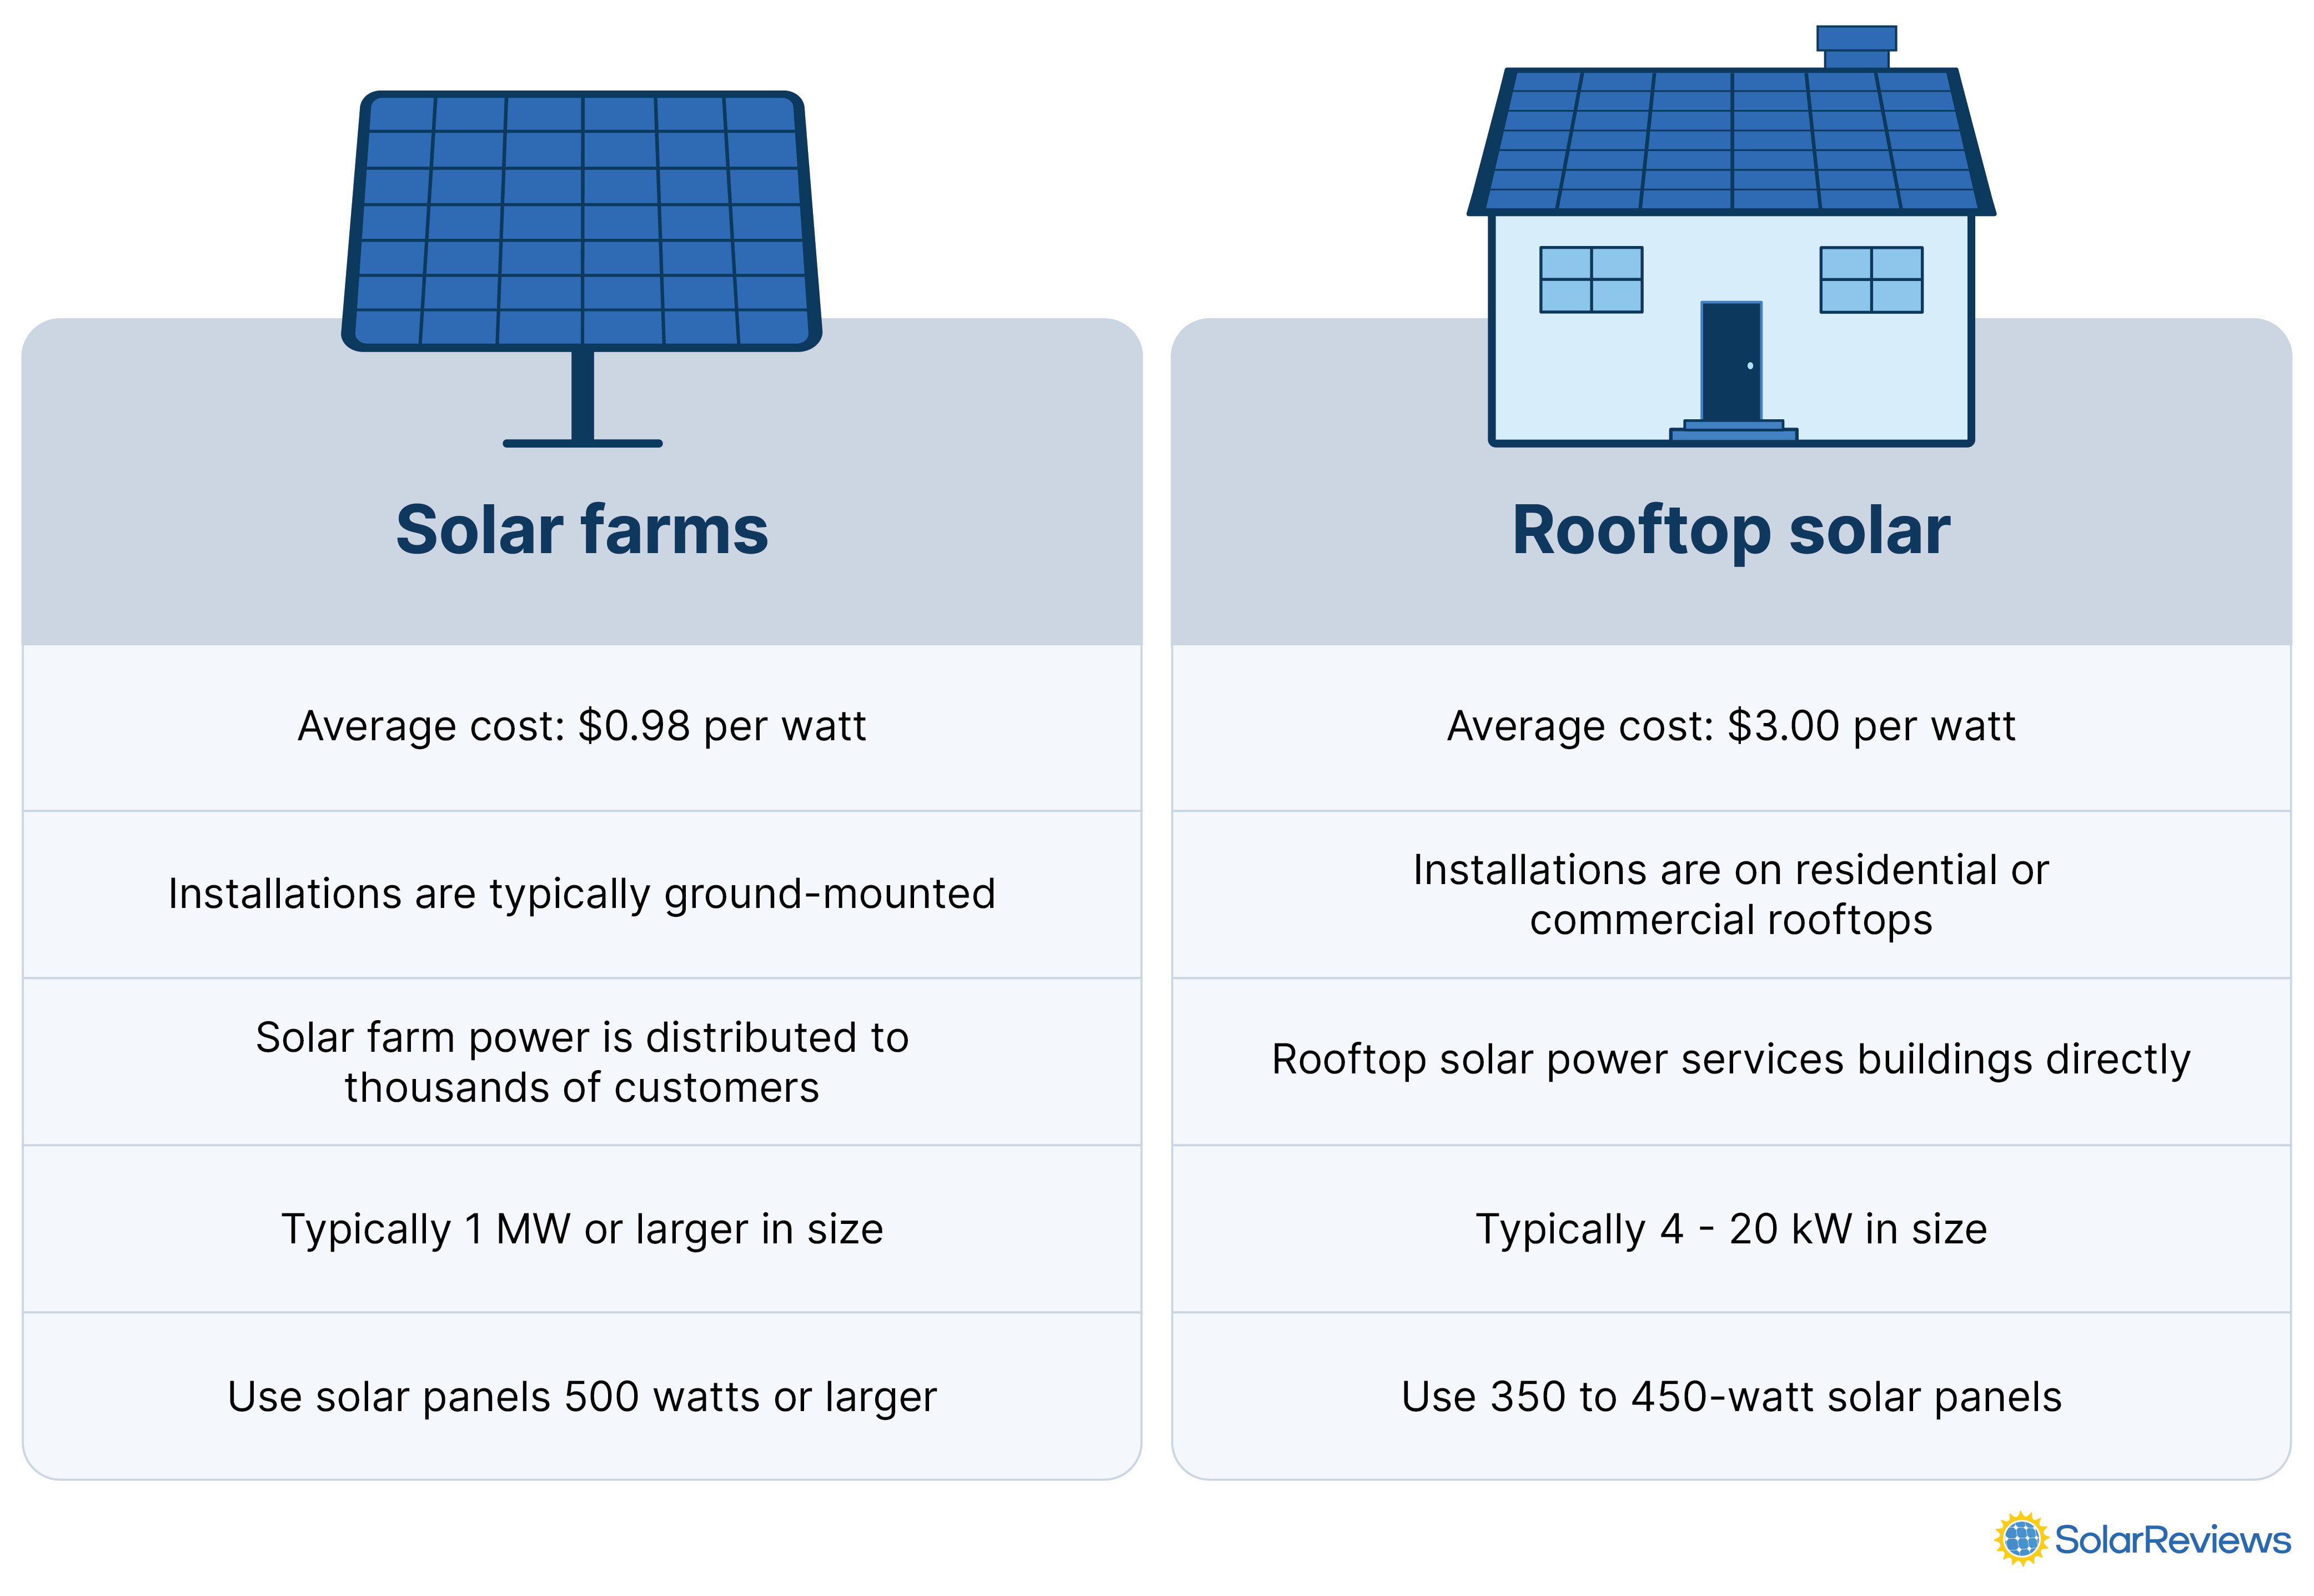 A graphic that outlines the differences between solar farms and rooftop solar systems, which are explained below.